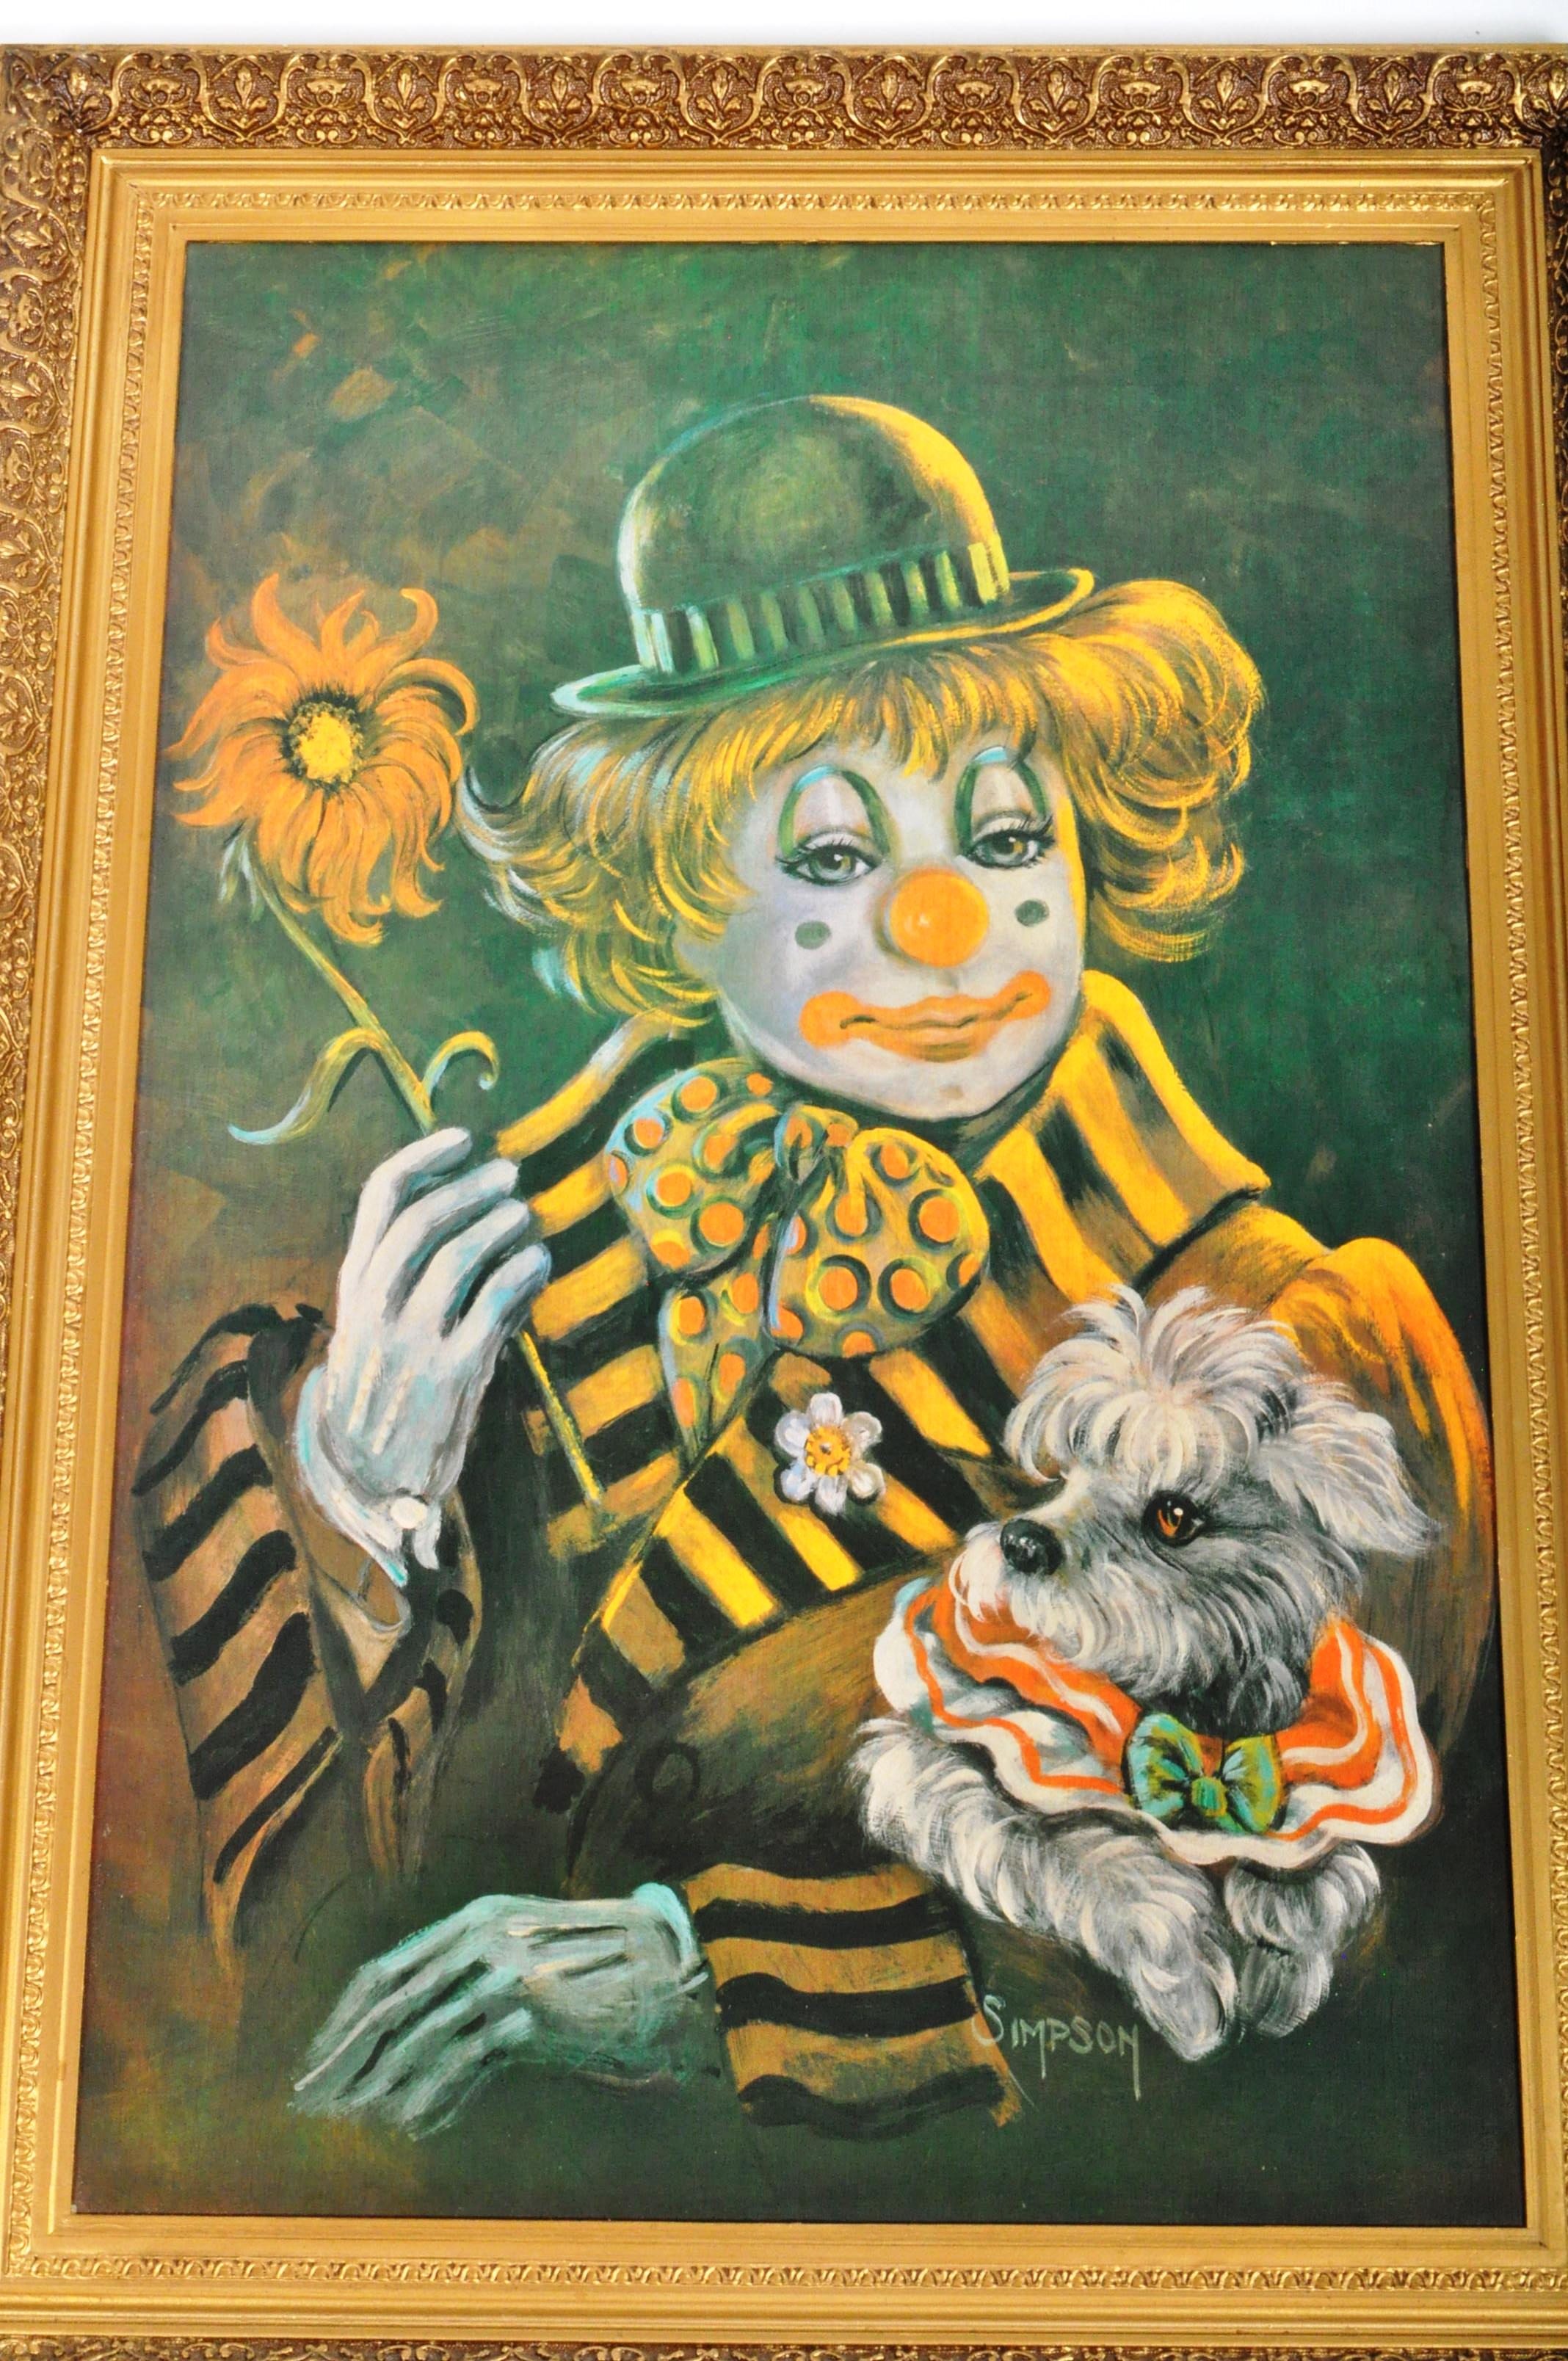 MID CENTURY CLOWN PRINT ON CARD SET WITHIN A BRASS EFFECT FRAME - Image 2 of 7